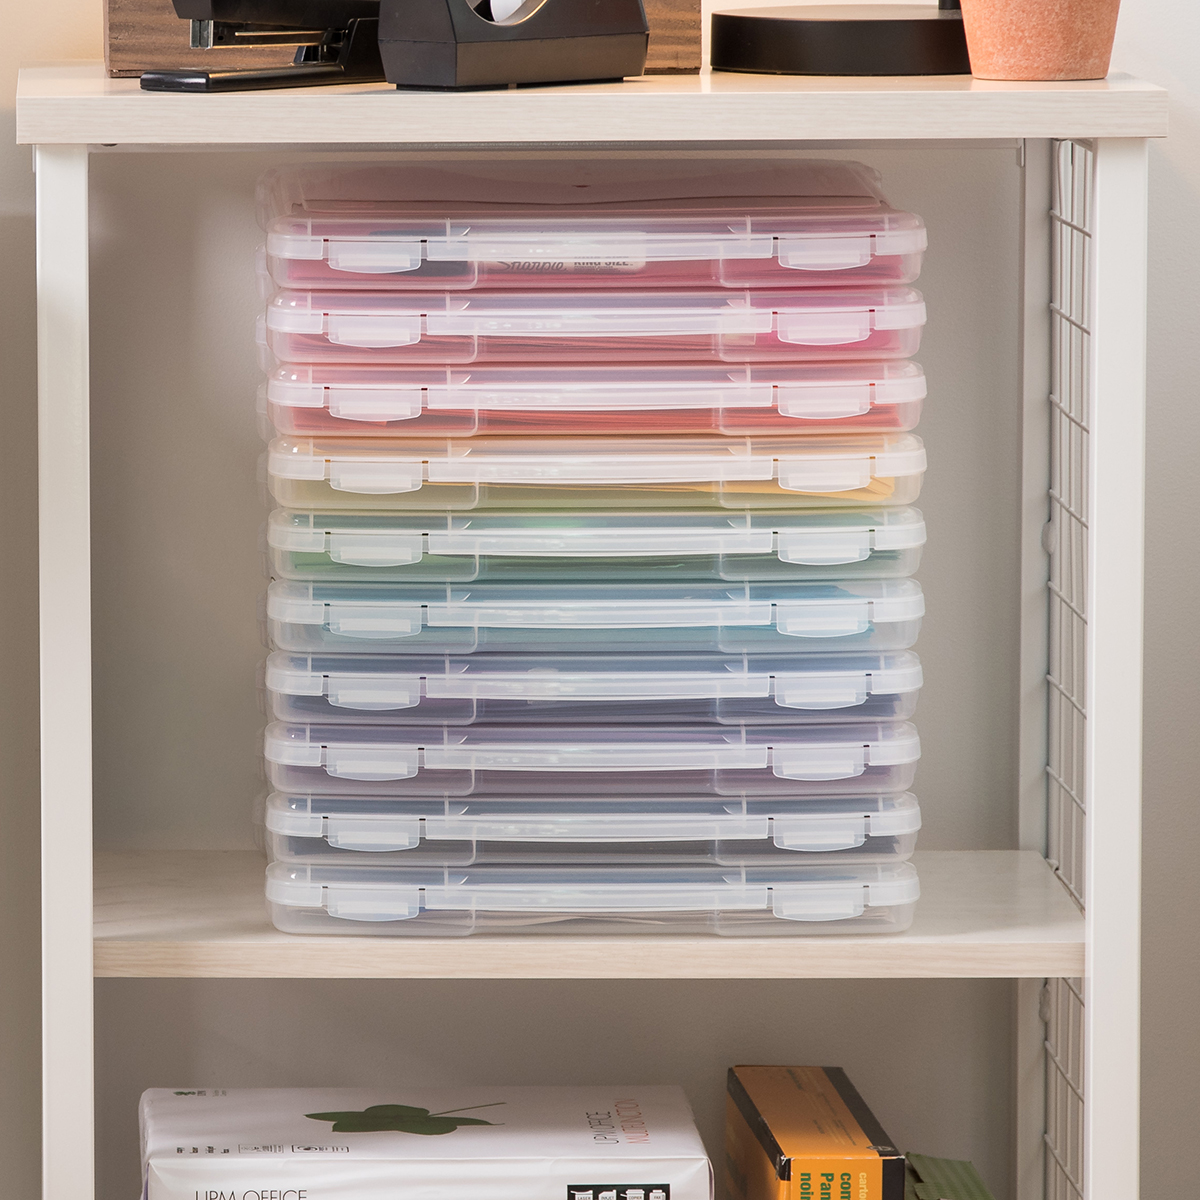 https://www.containerstore.com/catalogimages/359363/10077403-project-case-clear-VEN3.jpg